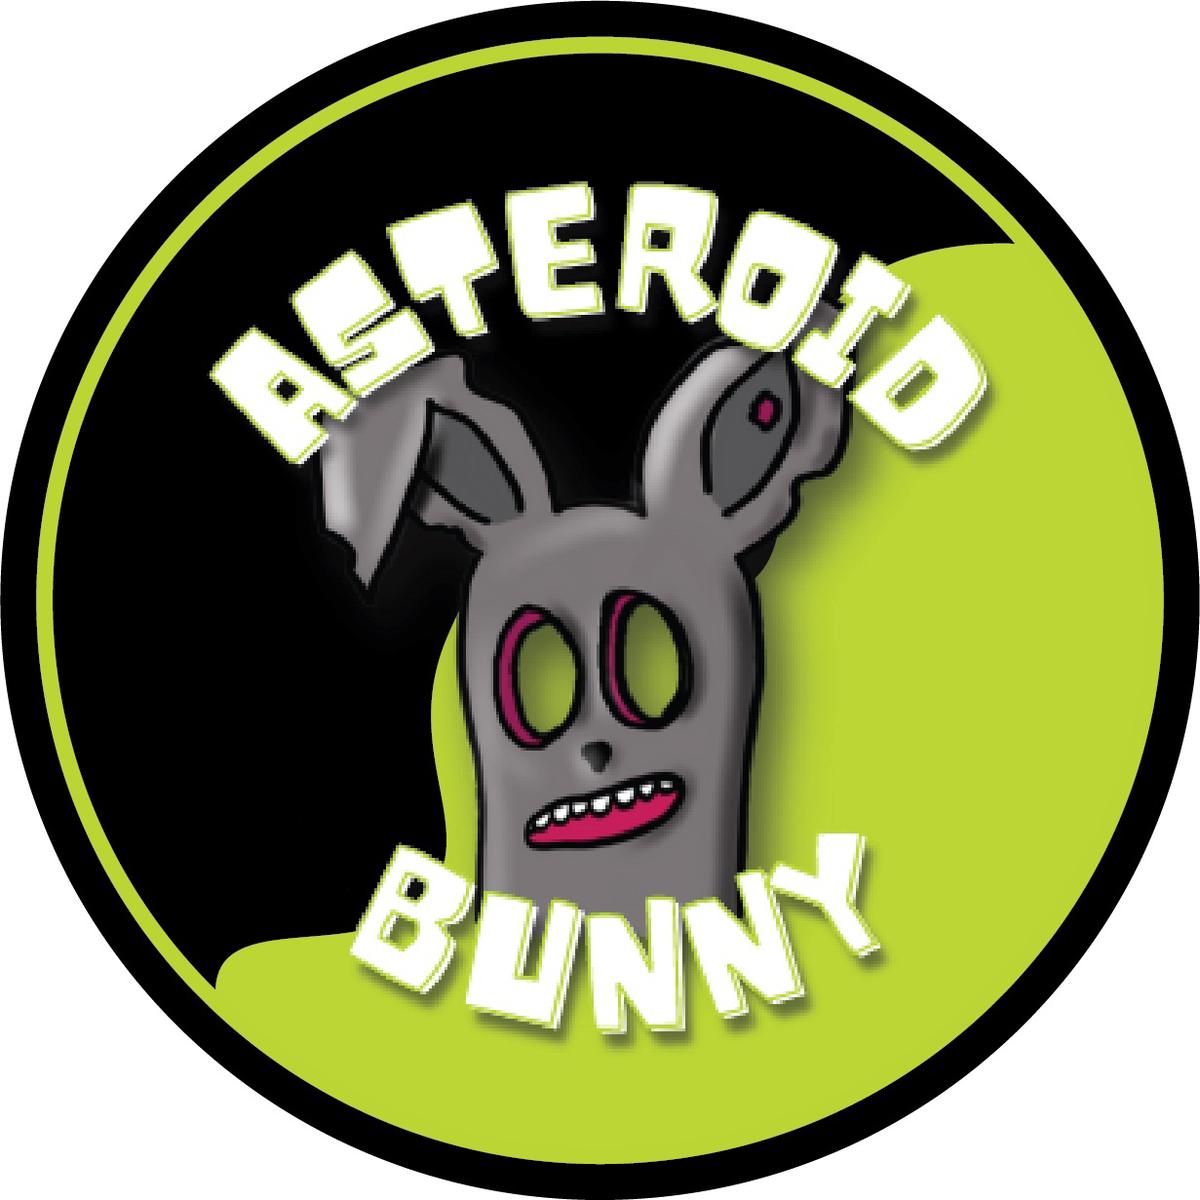 Asteroid Bunny's images